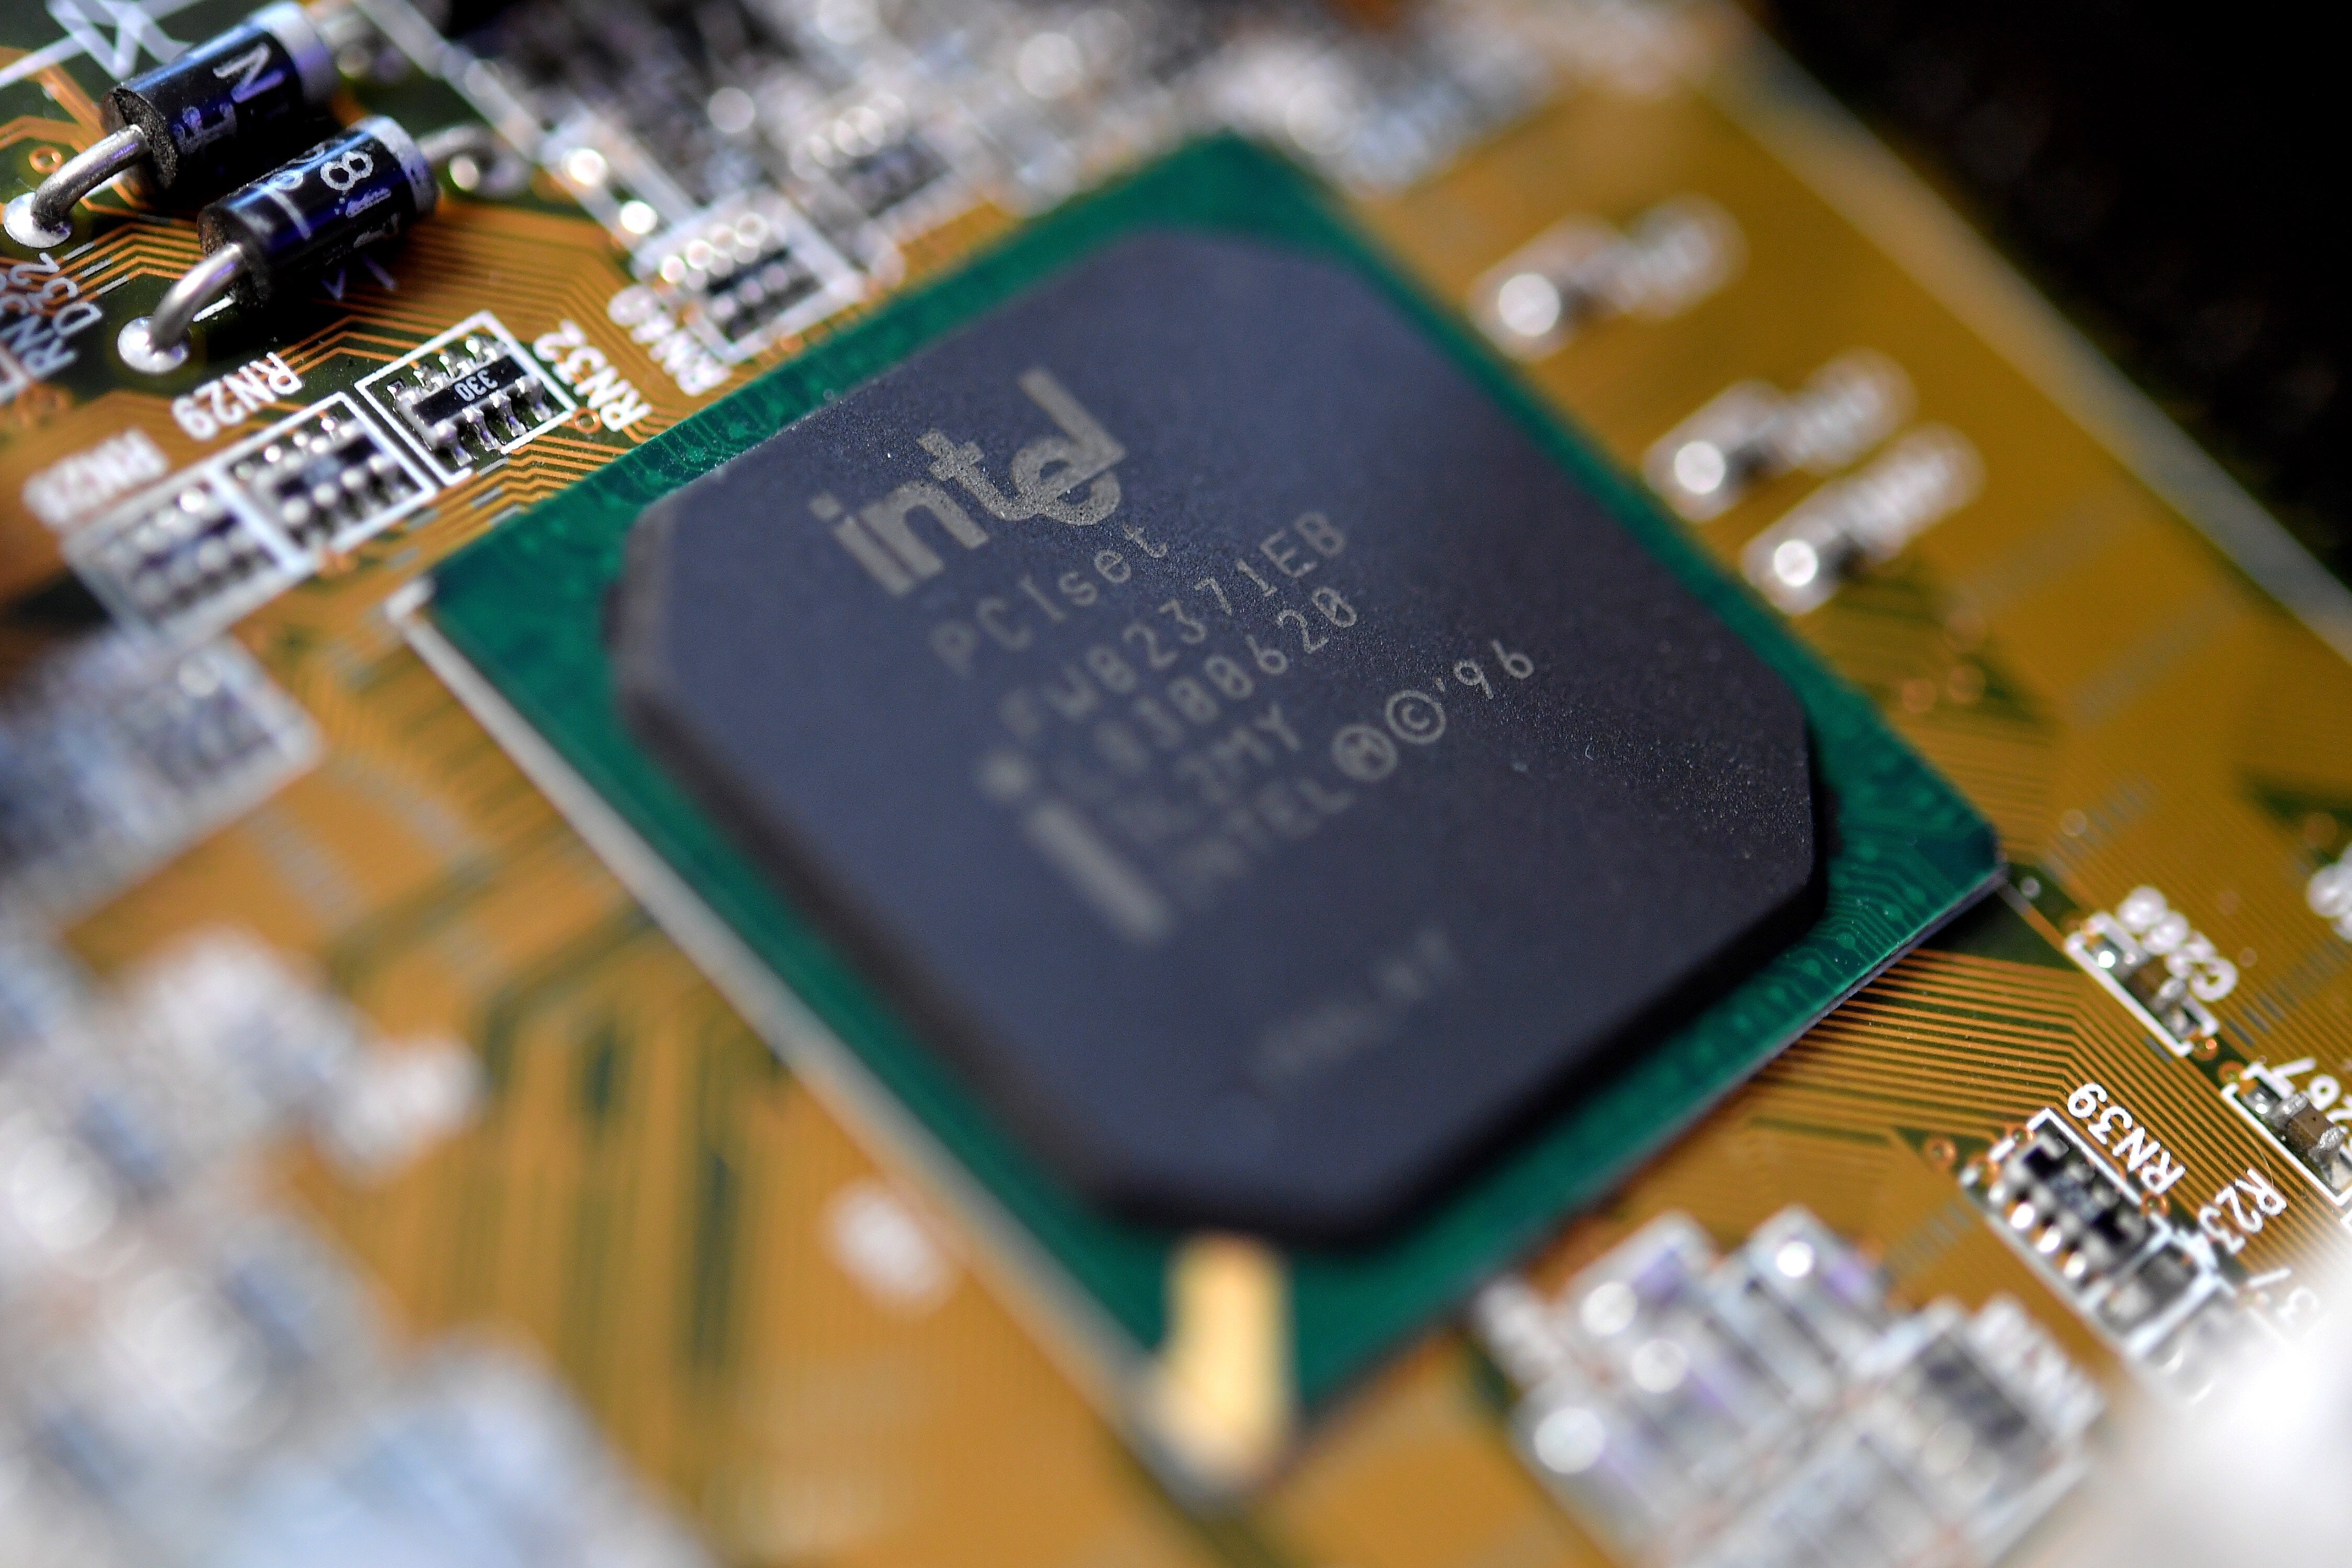 Intel’s transformation from a memory chip company in the ’70s to a microprocessor company in the ’80s set in motion the PC era, with Intel not only supplying the key component, but also setting the standards. Photo: EPA-EFE